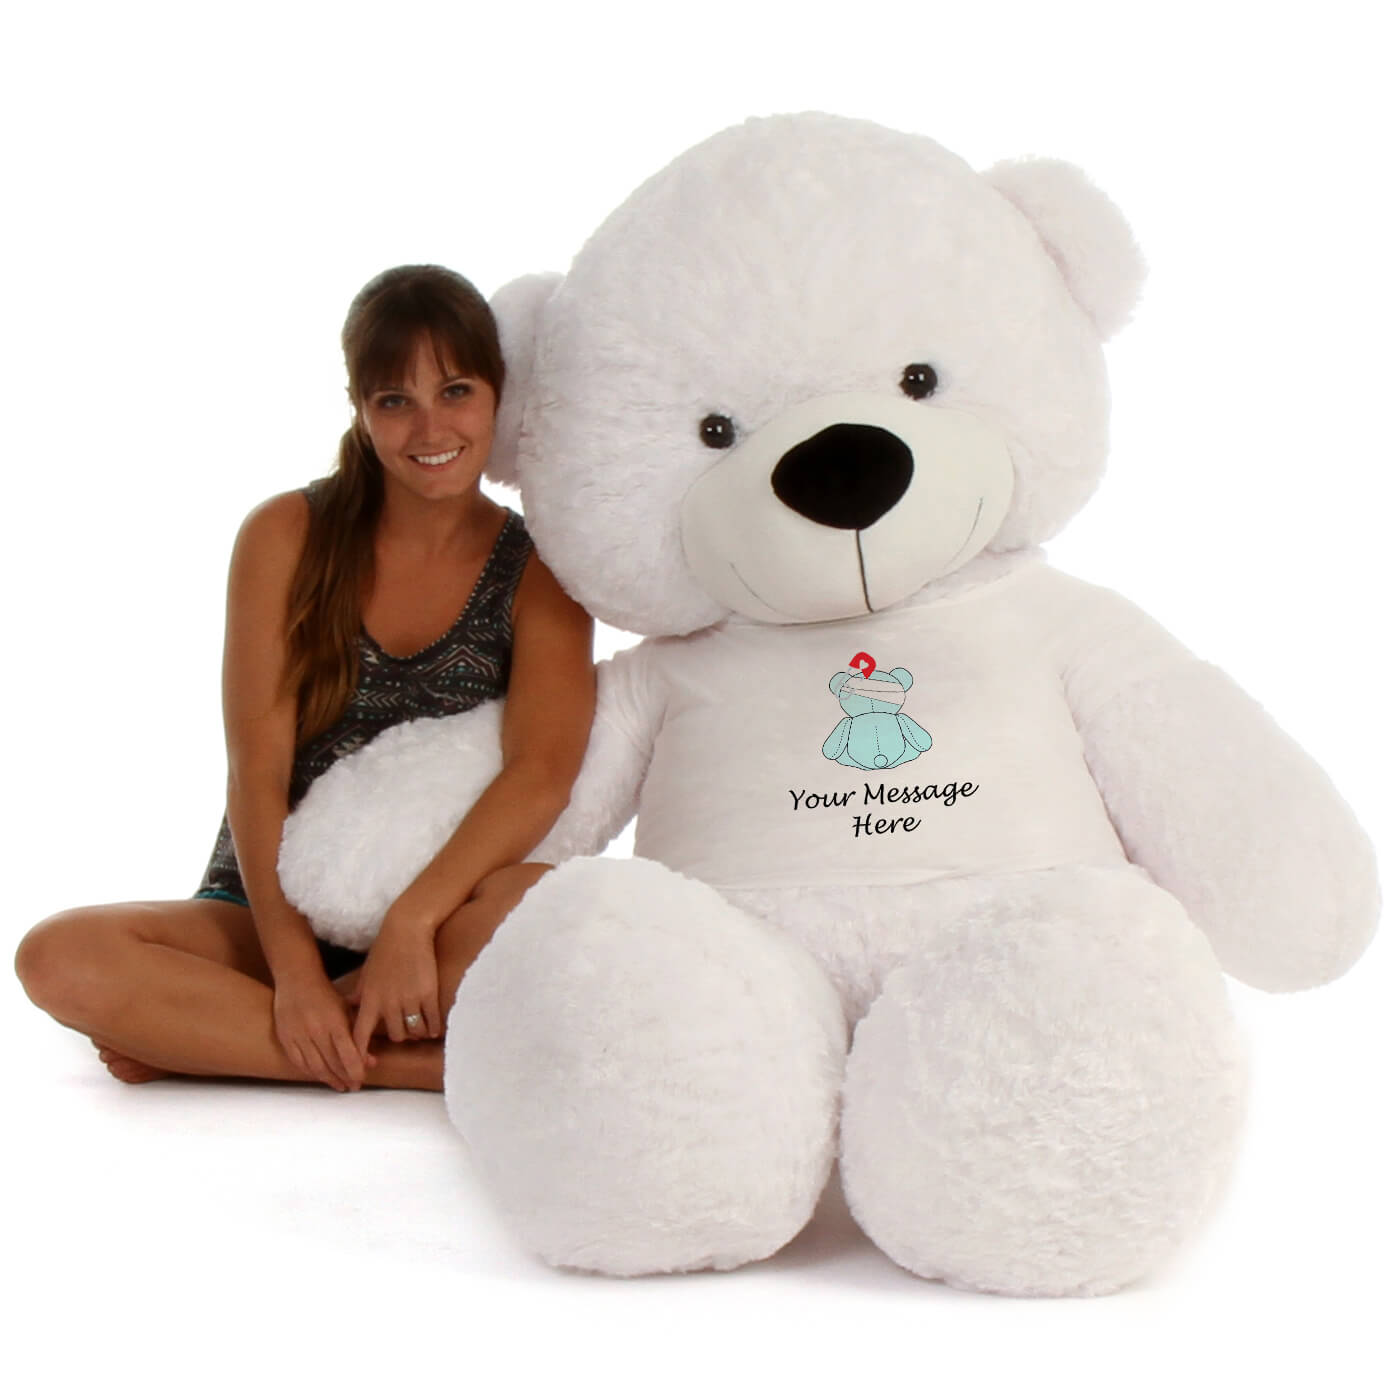 6ft-white-giant-teddy-bear-coco-cuddles-in-a-get-well-soon-your-message-here-t-shirt.jpg